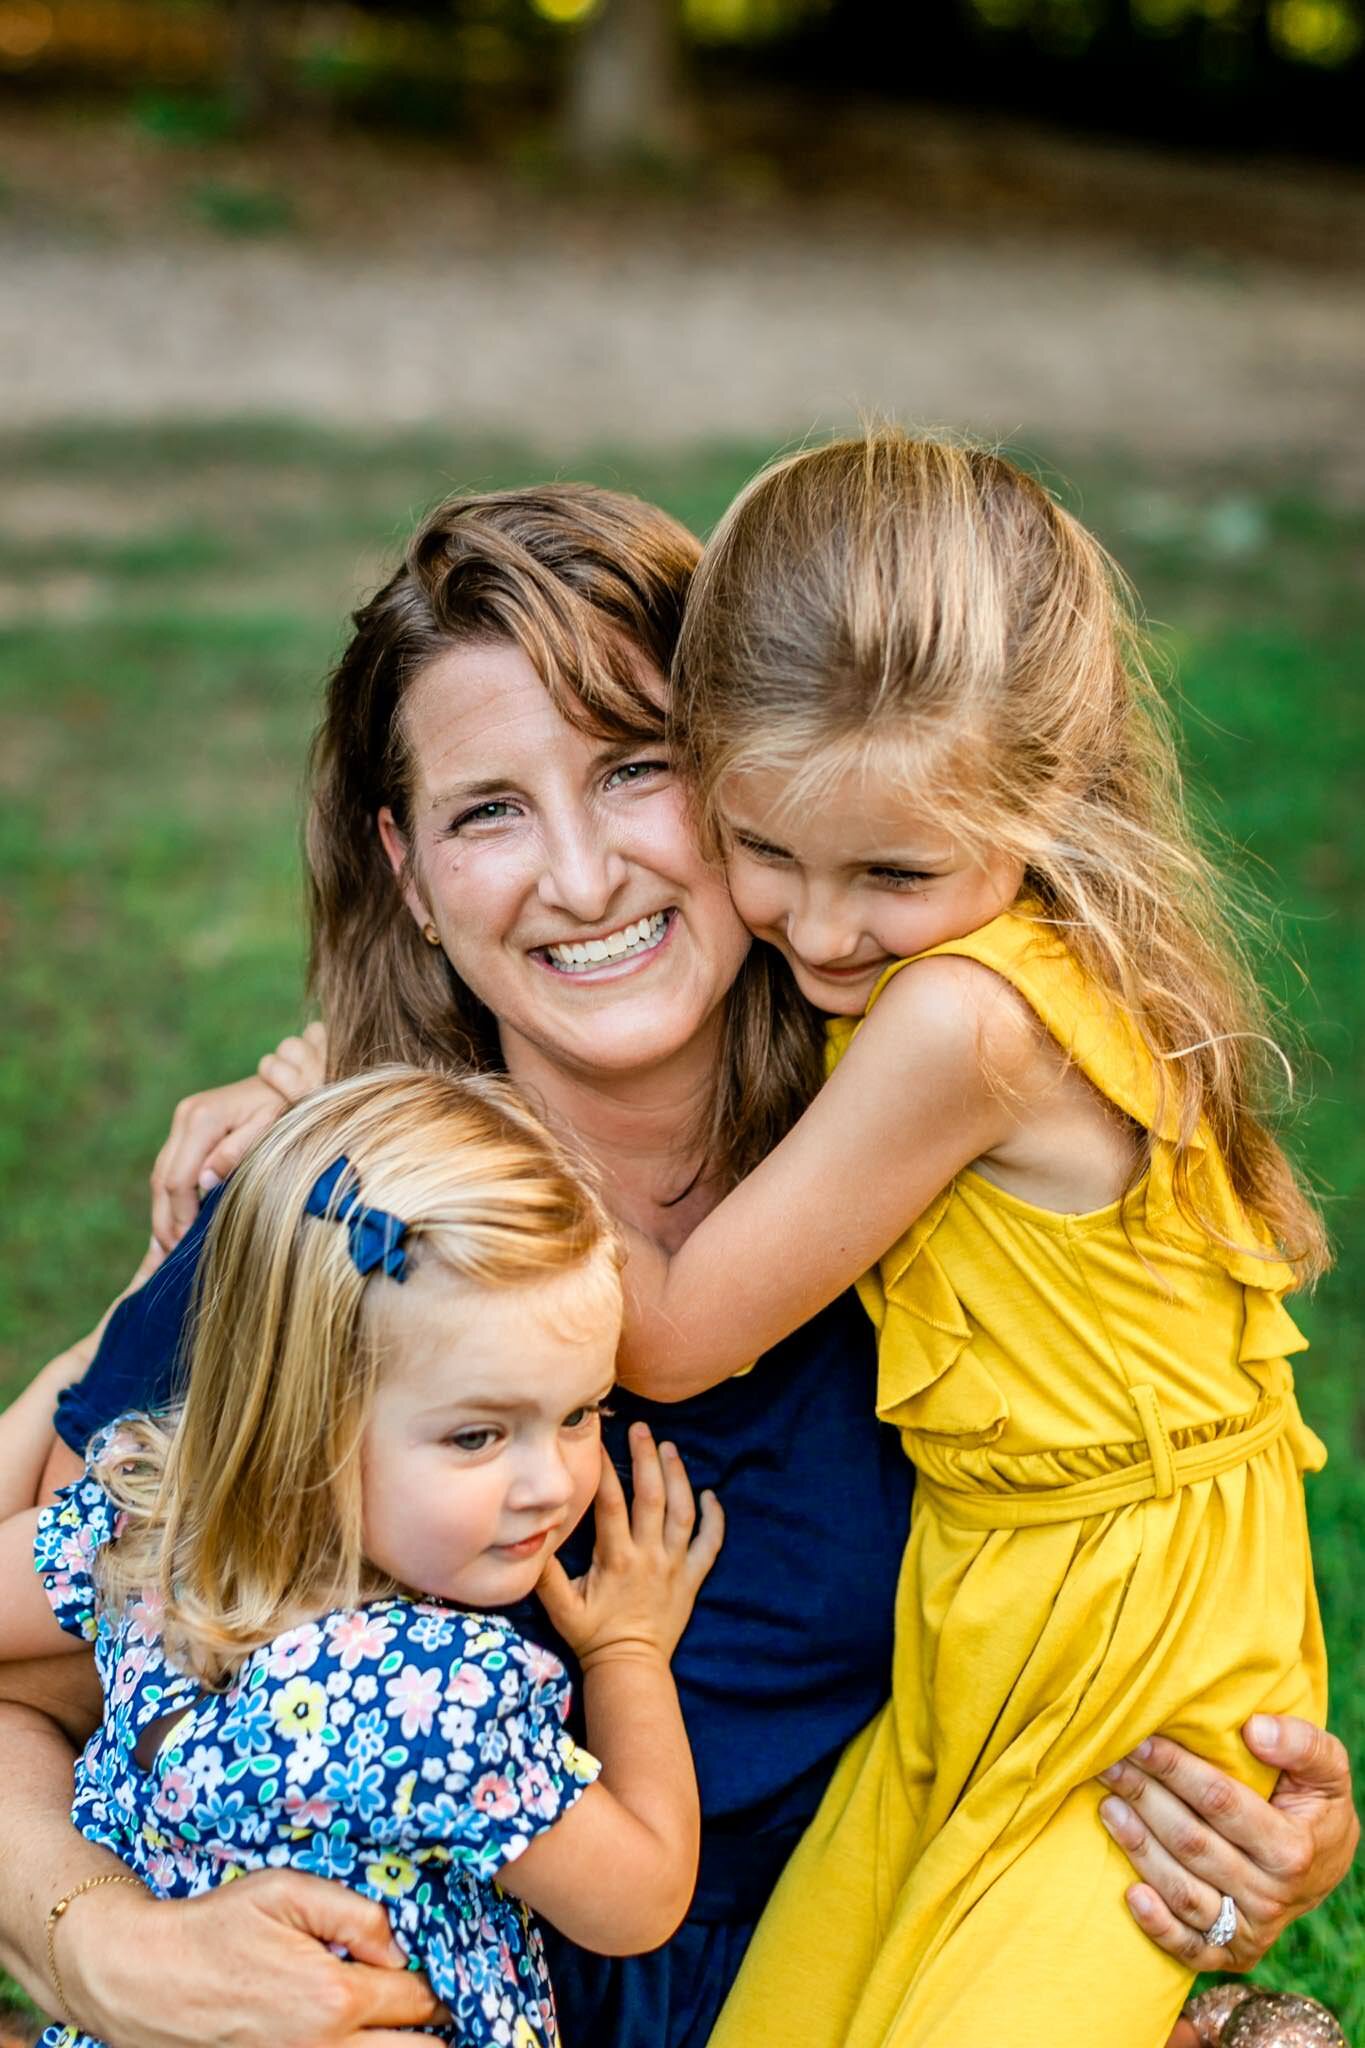 Girls hugging their mother | Cary Family Photographer | By G. Lin Photography